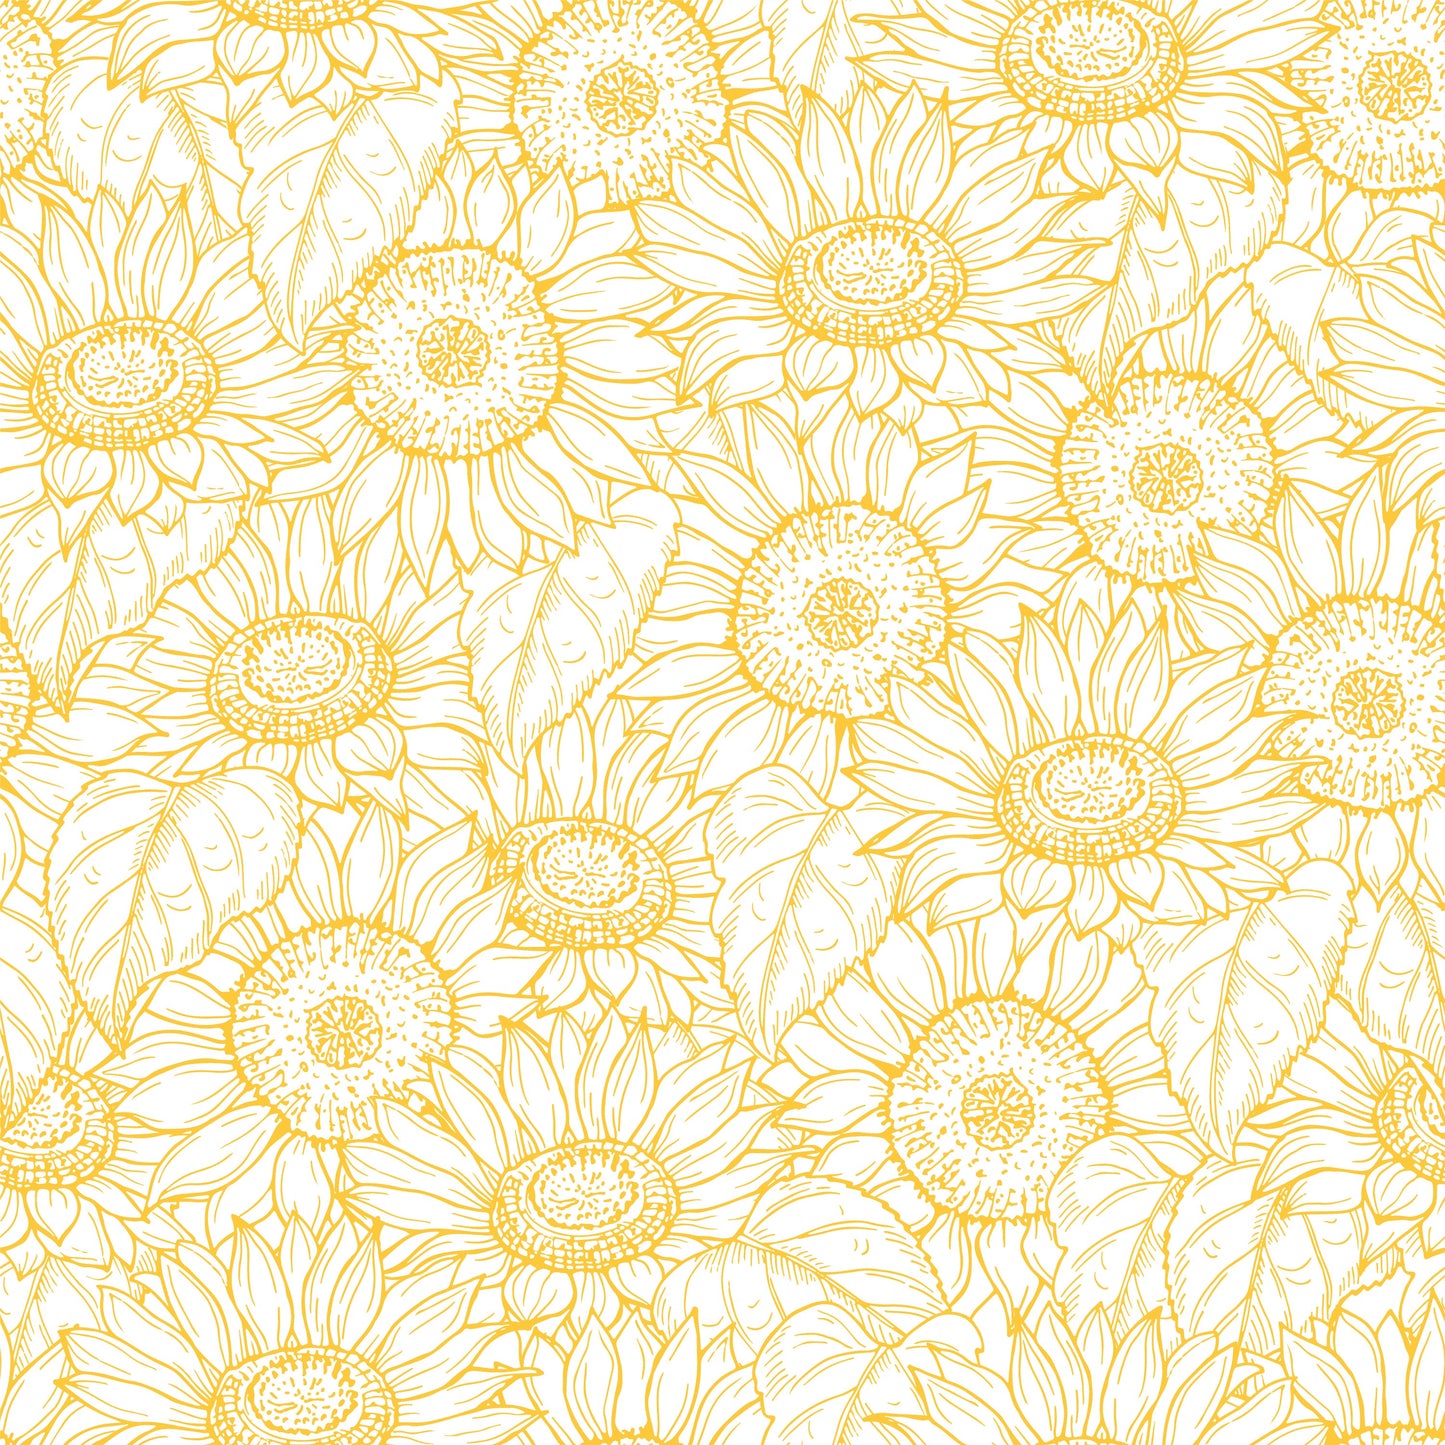 Sunflower Bunch (Faux Leather - 8" x 13" Printed Sheet)